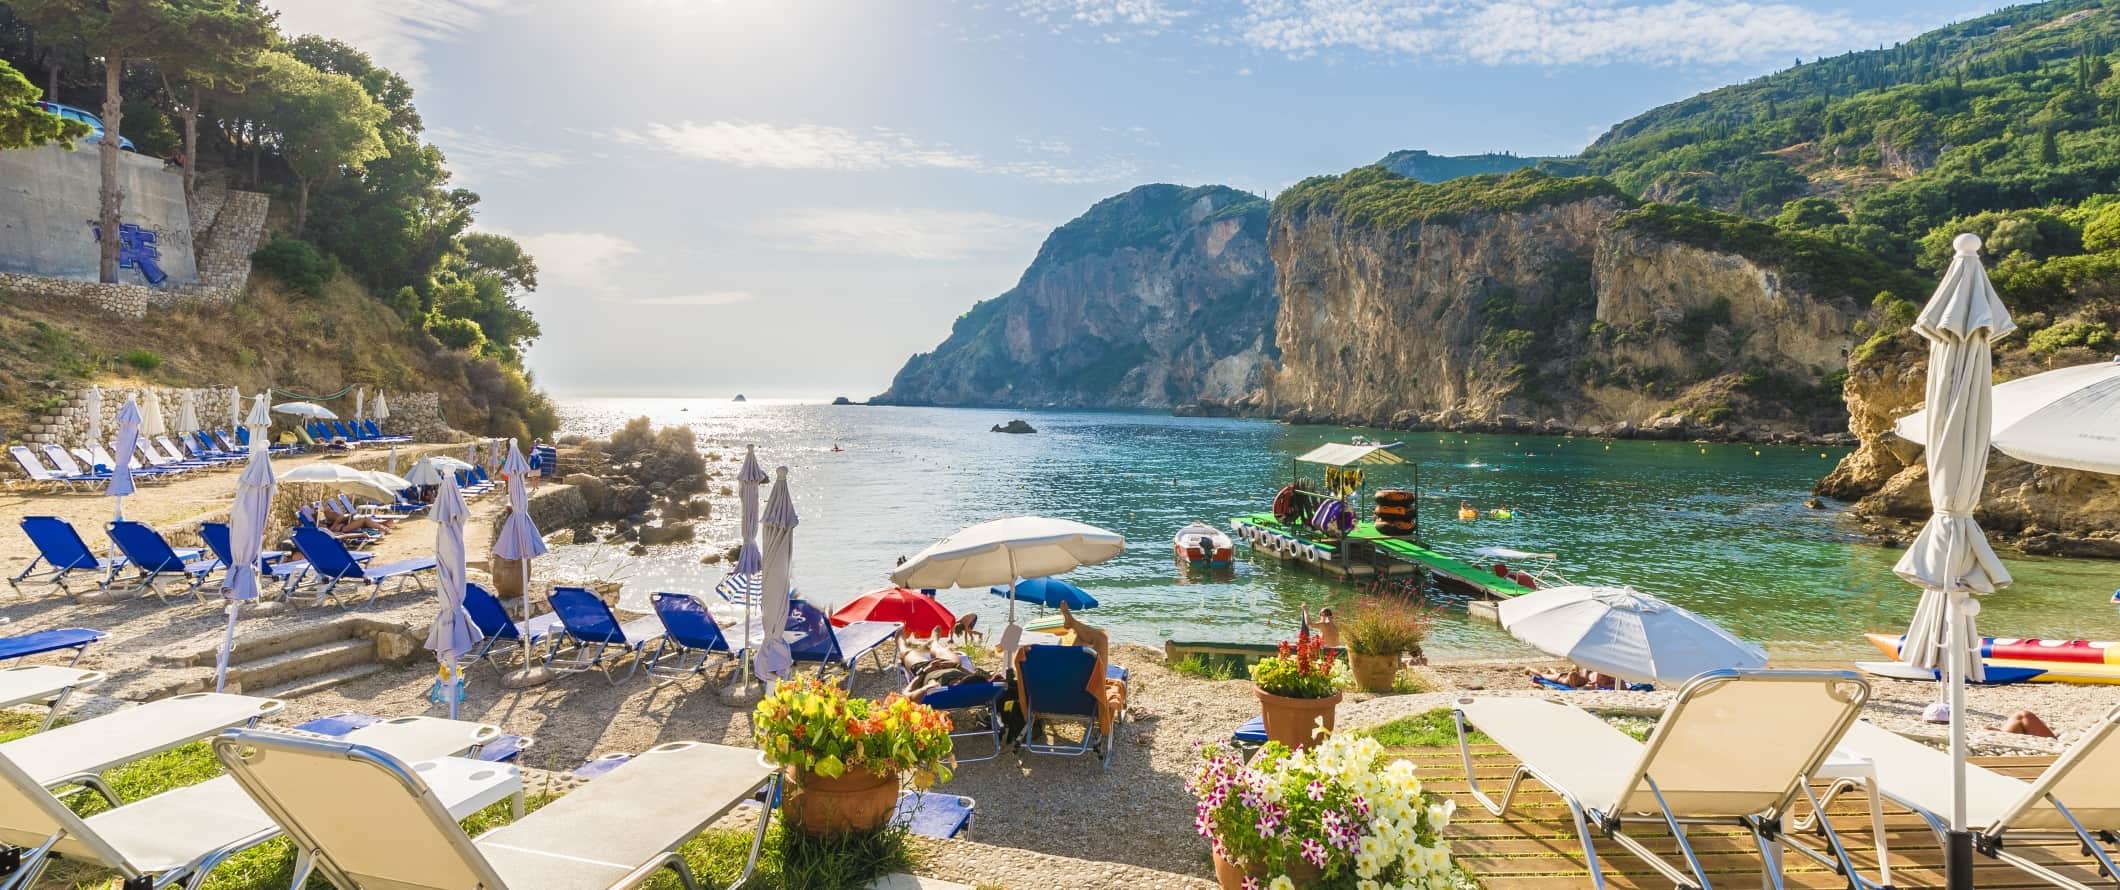 Beach loungers on a beach with rocky, tree-covered cliffs in the background and clear, turquoise waters in Corfu, Greece.